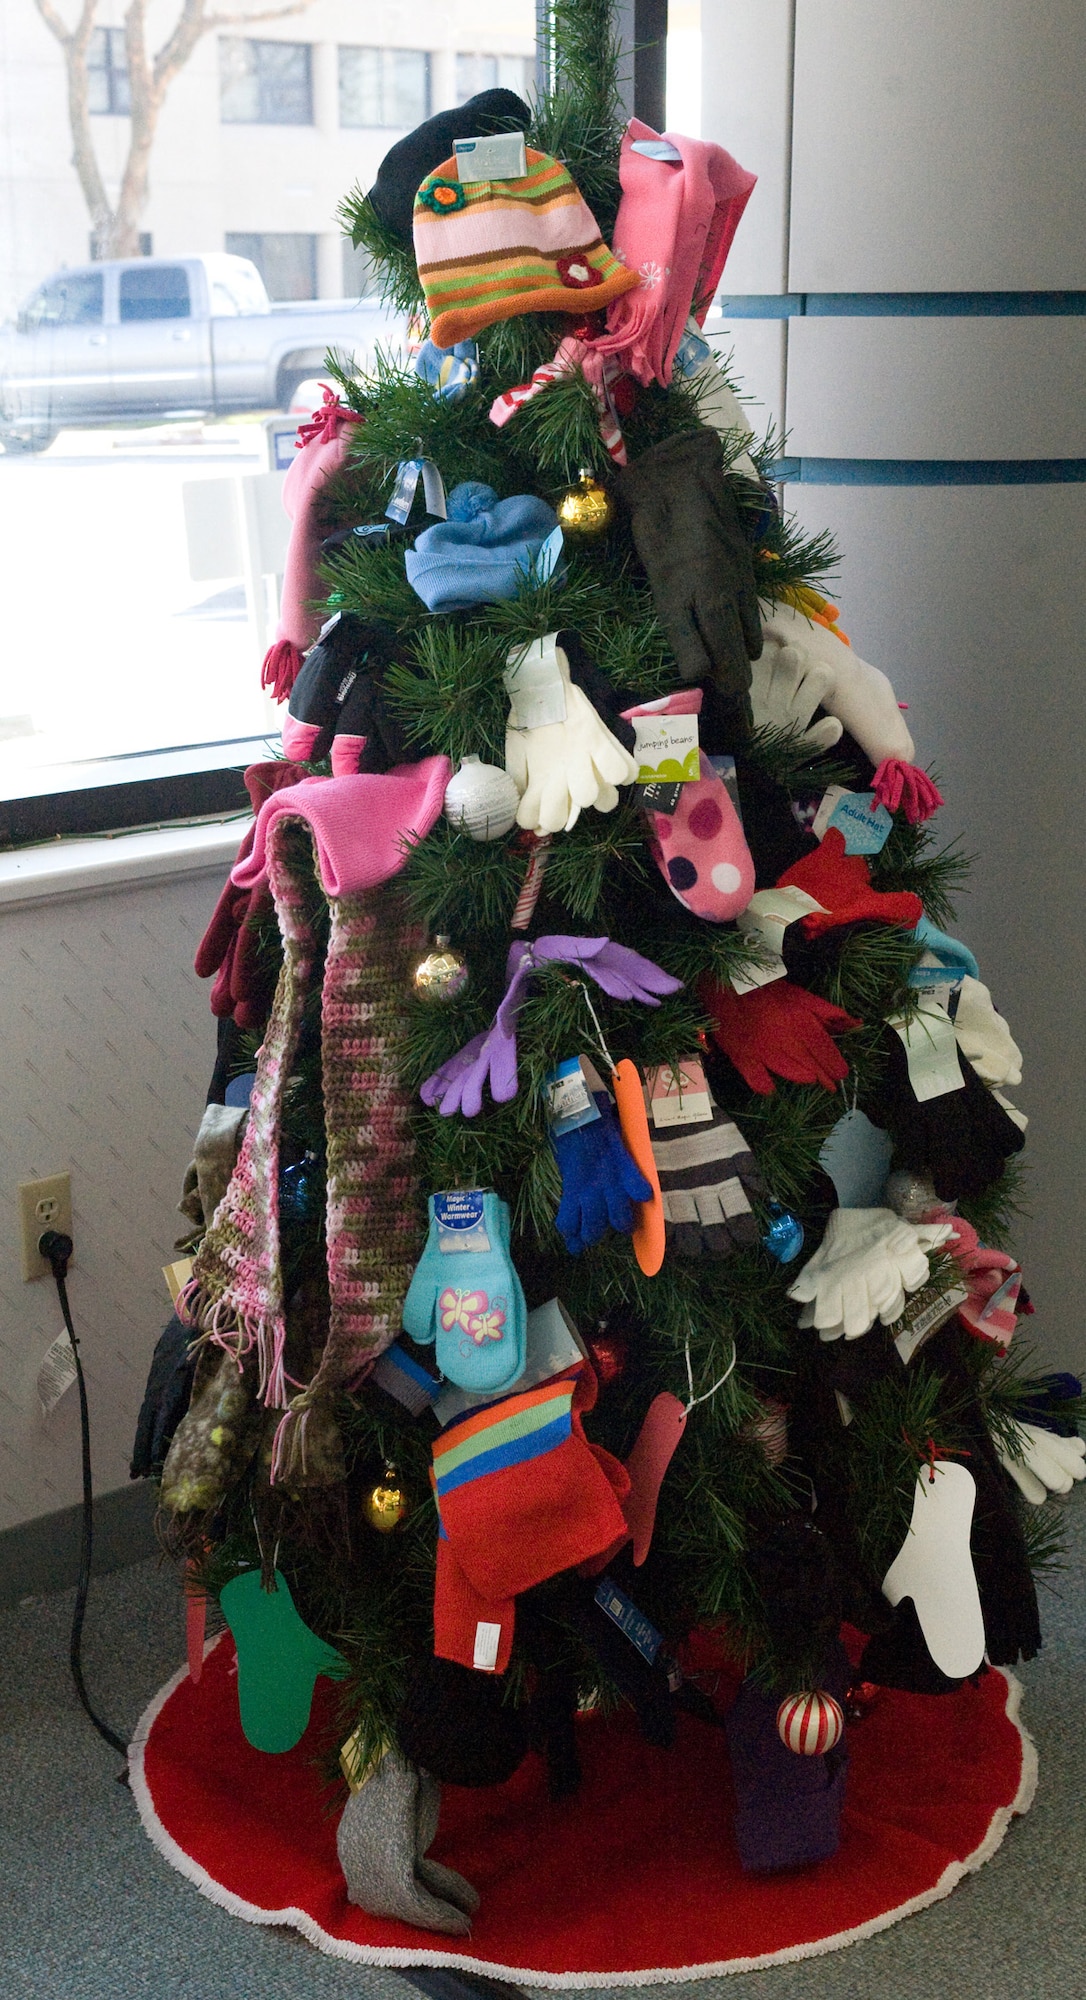 The Mitten Tree at the Dover Air Force Base Library is decorated with more than 75 articles of clothing that will be donated to the local shelter in Dover. (U.S. Air Force photo/Brianne Zimny)
